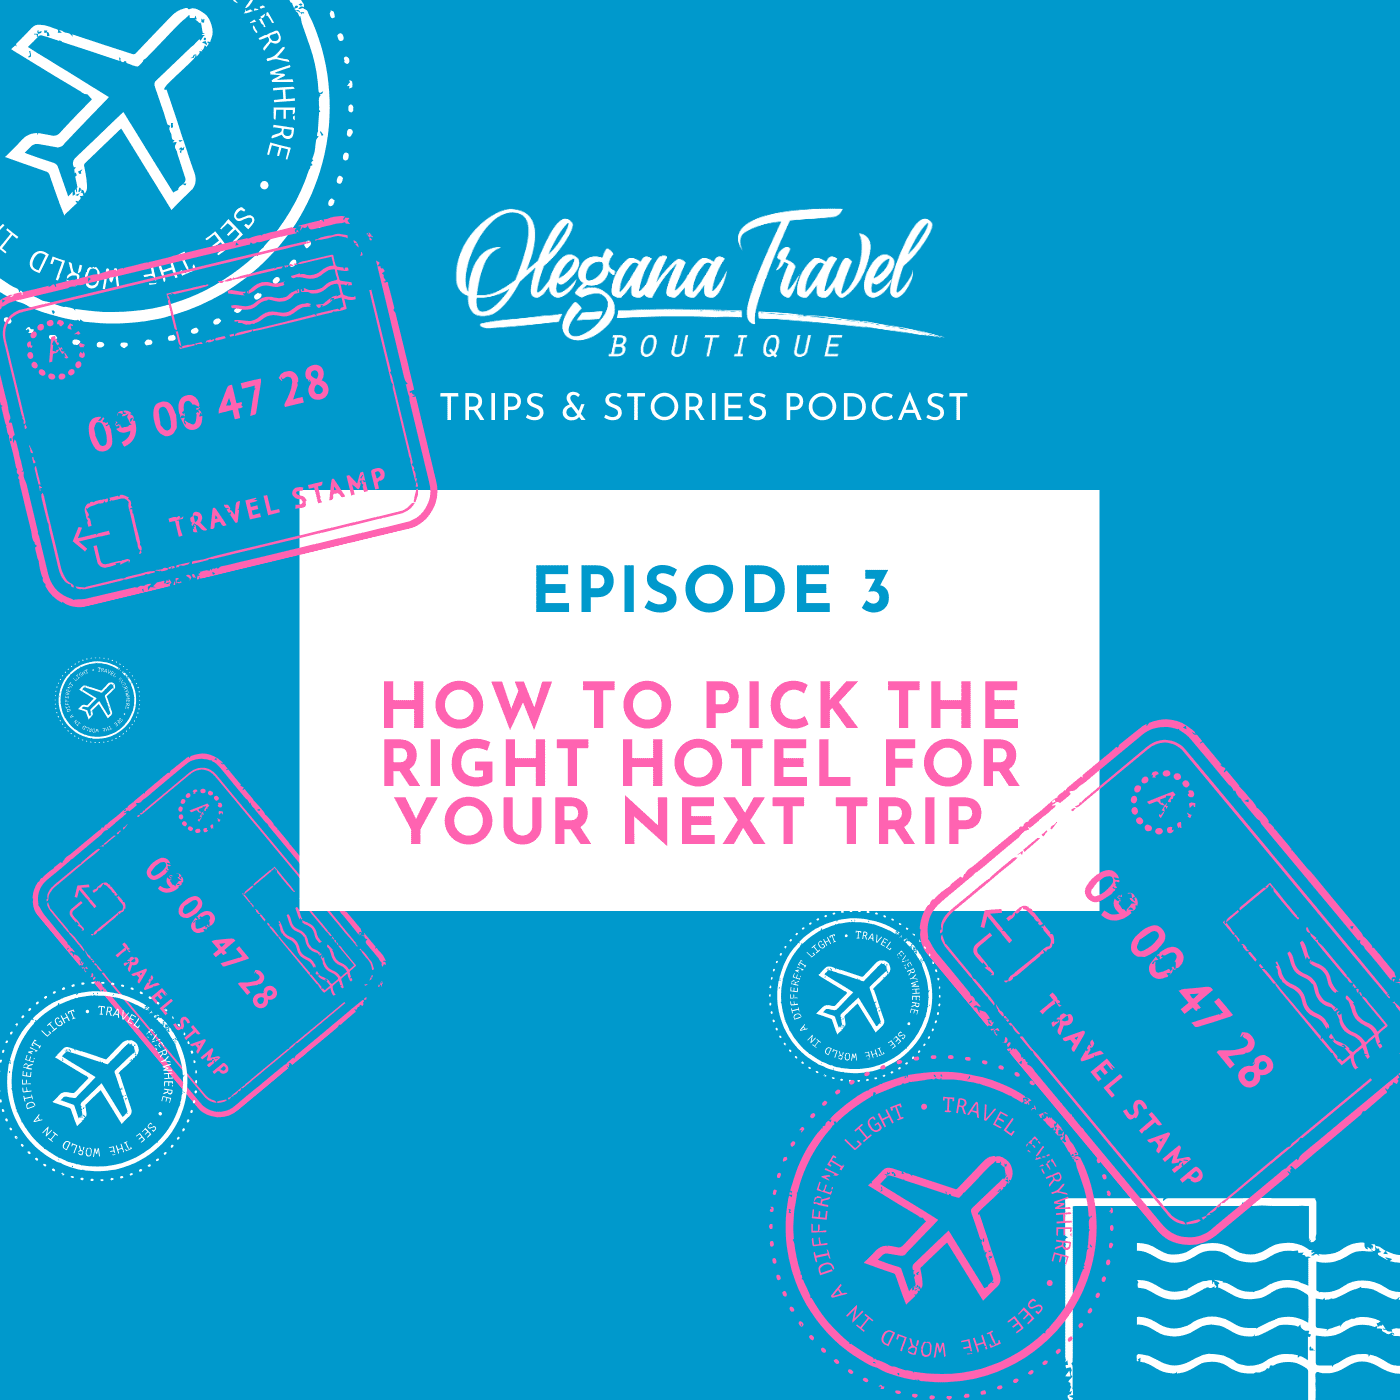 Olegana Travel Boutique PODCAST COVER ART - Episode #003 - How to choose the right hotel for your next trip